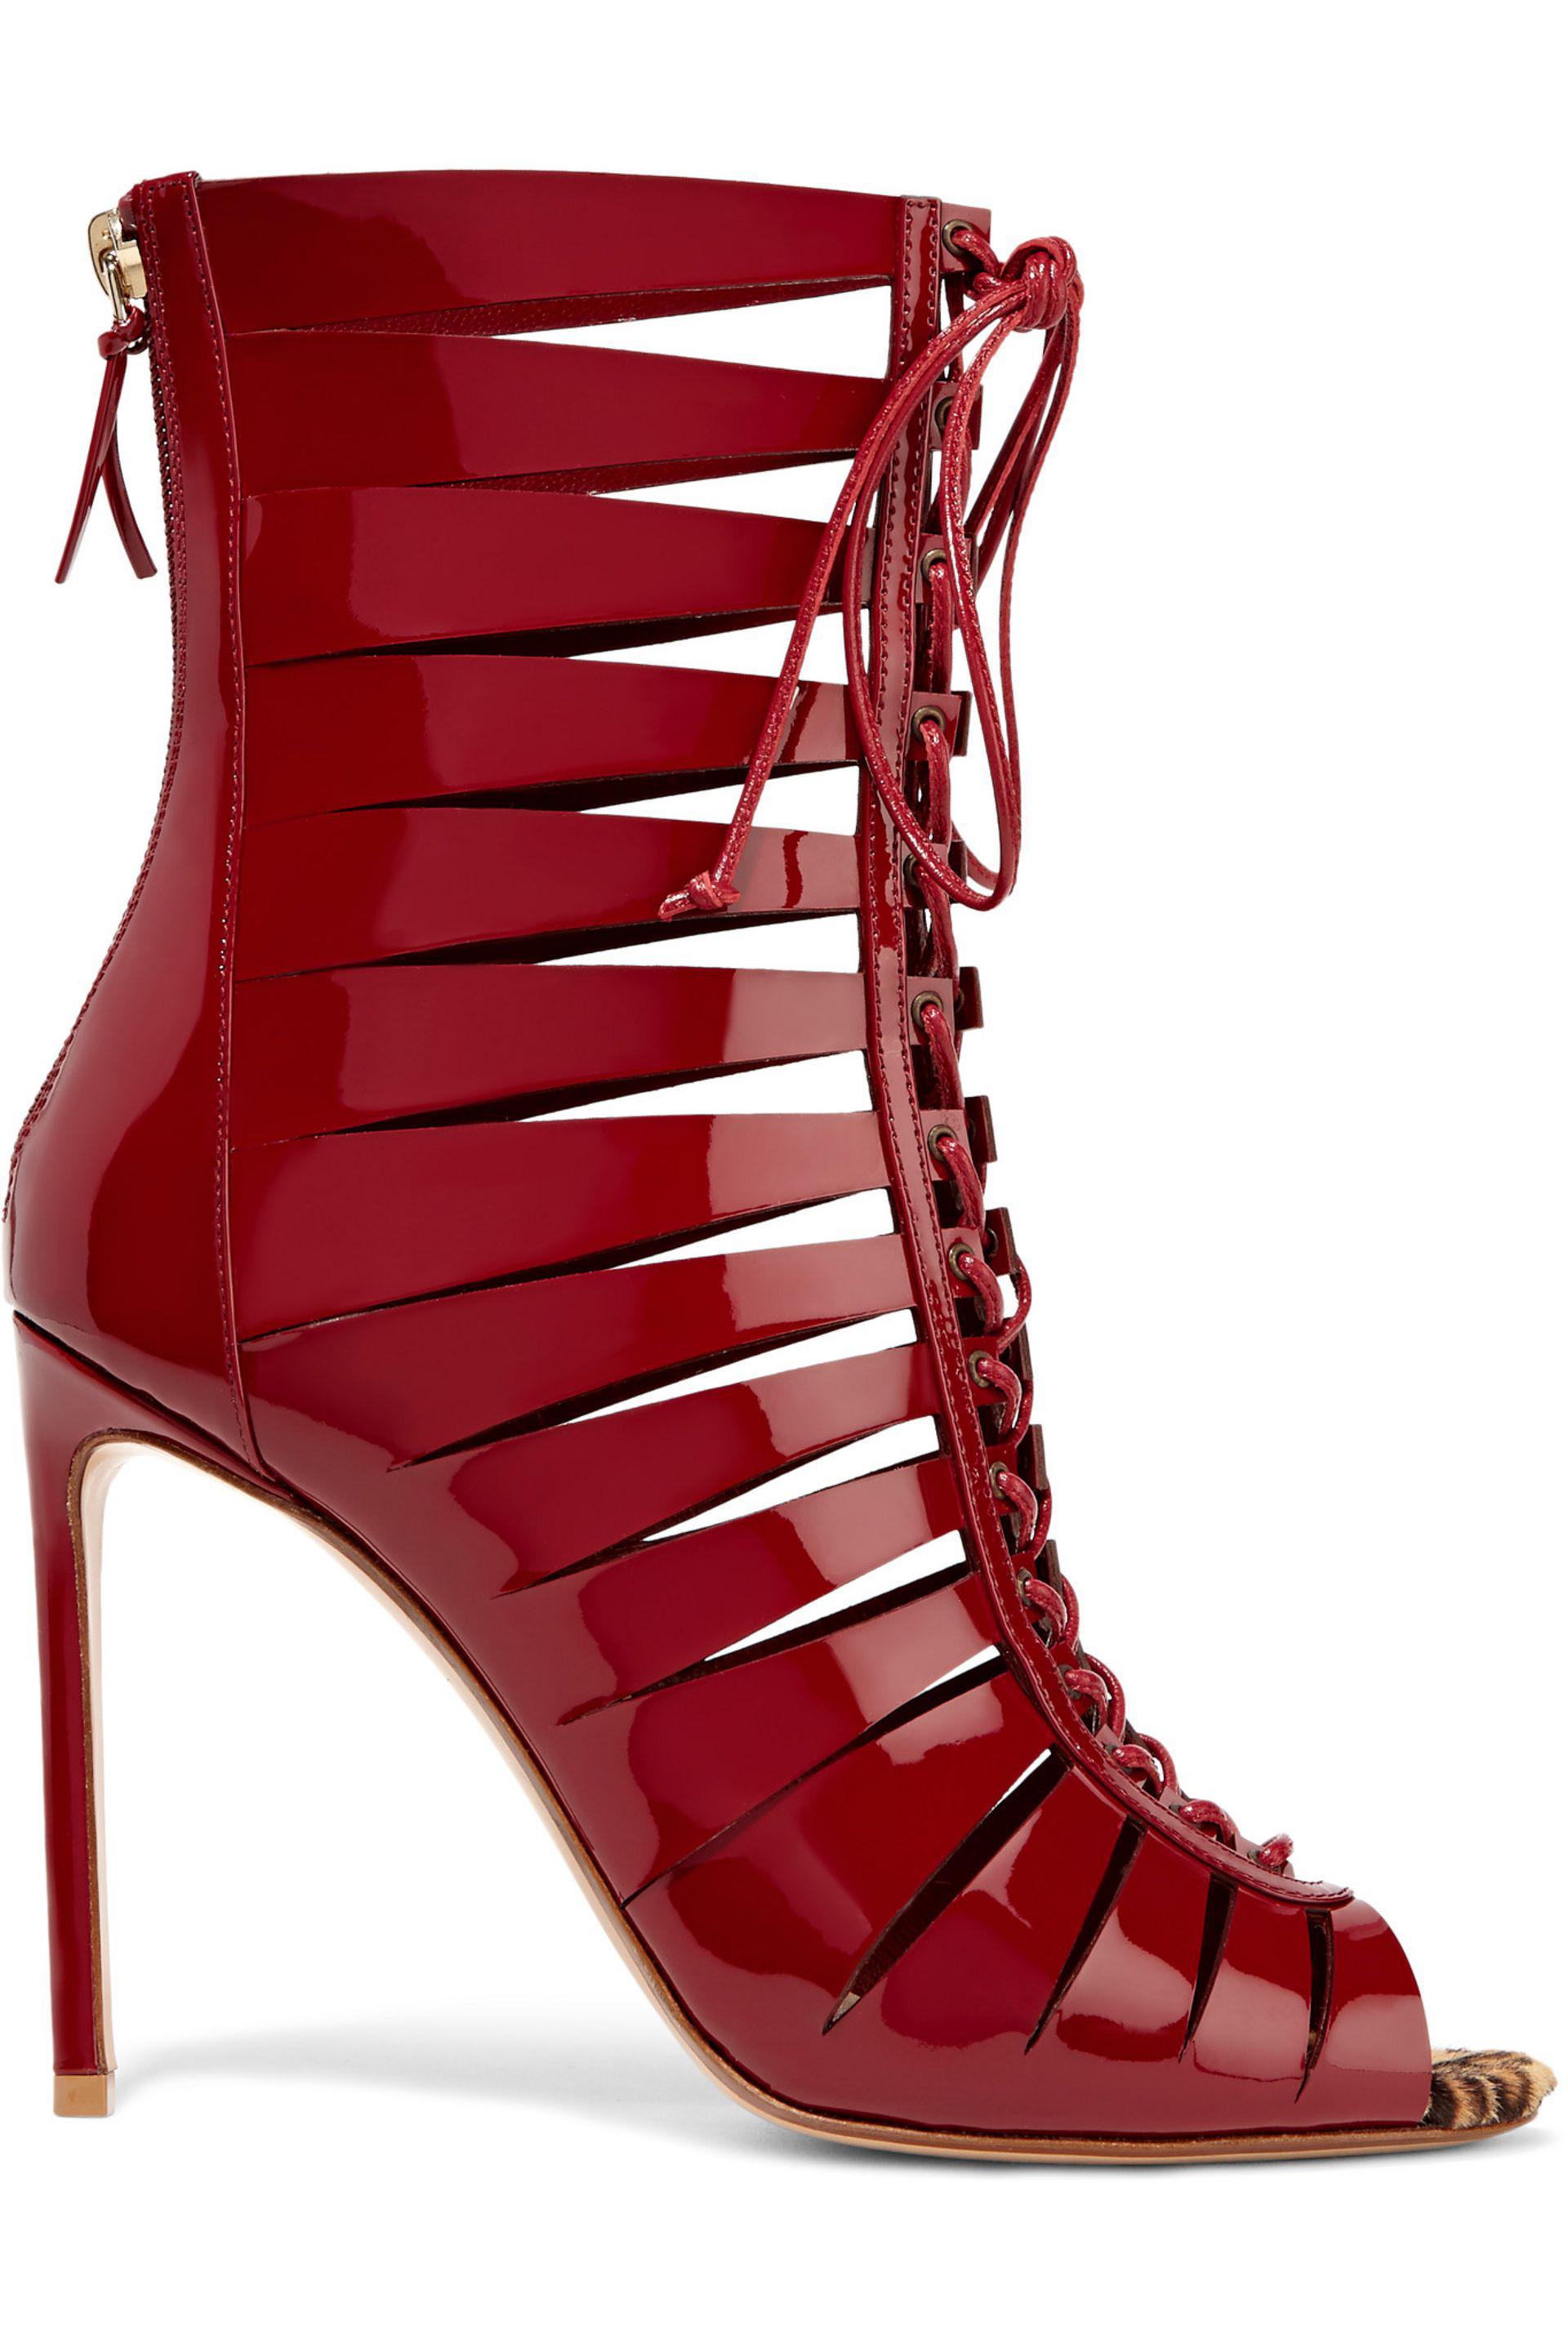 Francesco Russo Lace-up Patent-leather Sandals in Burgundy (Red) - Lyst